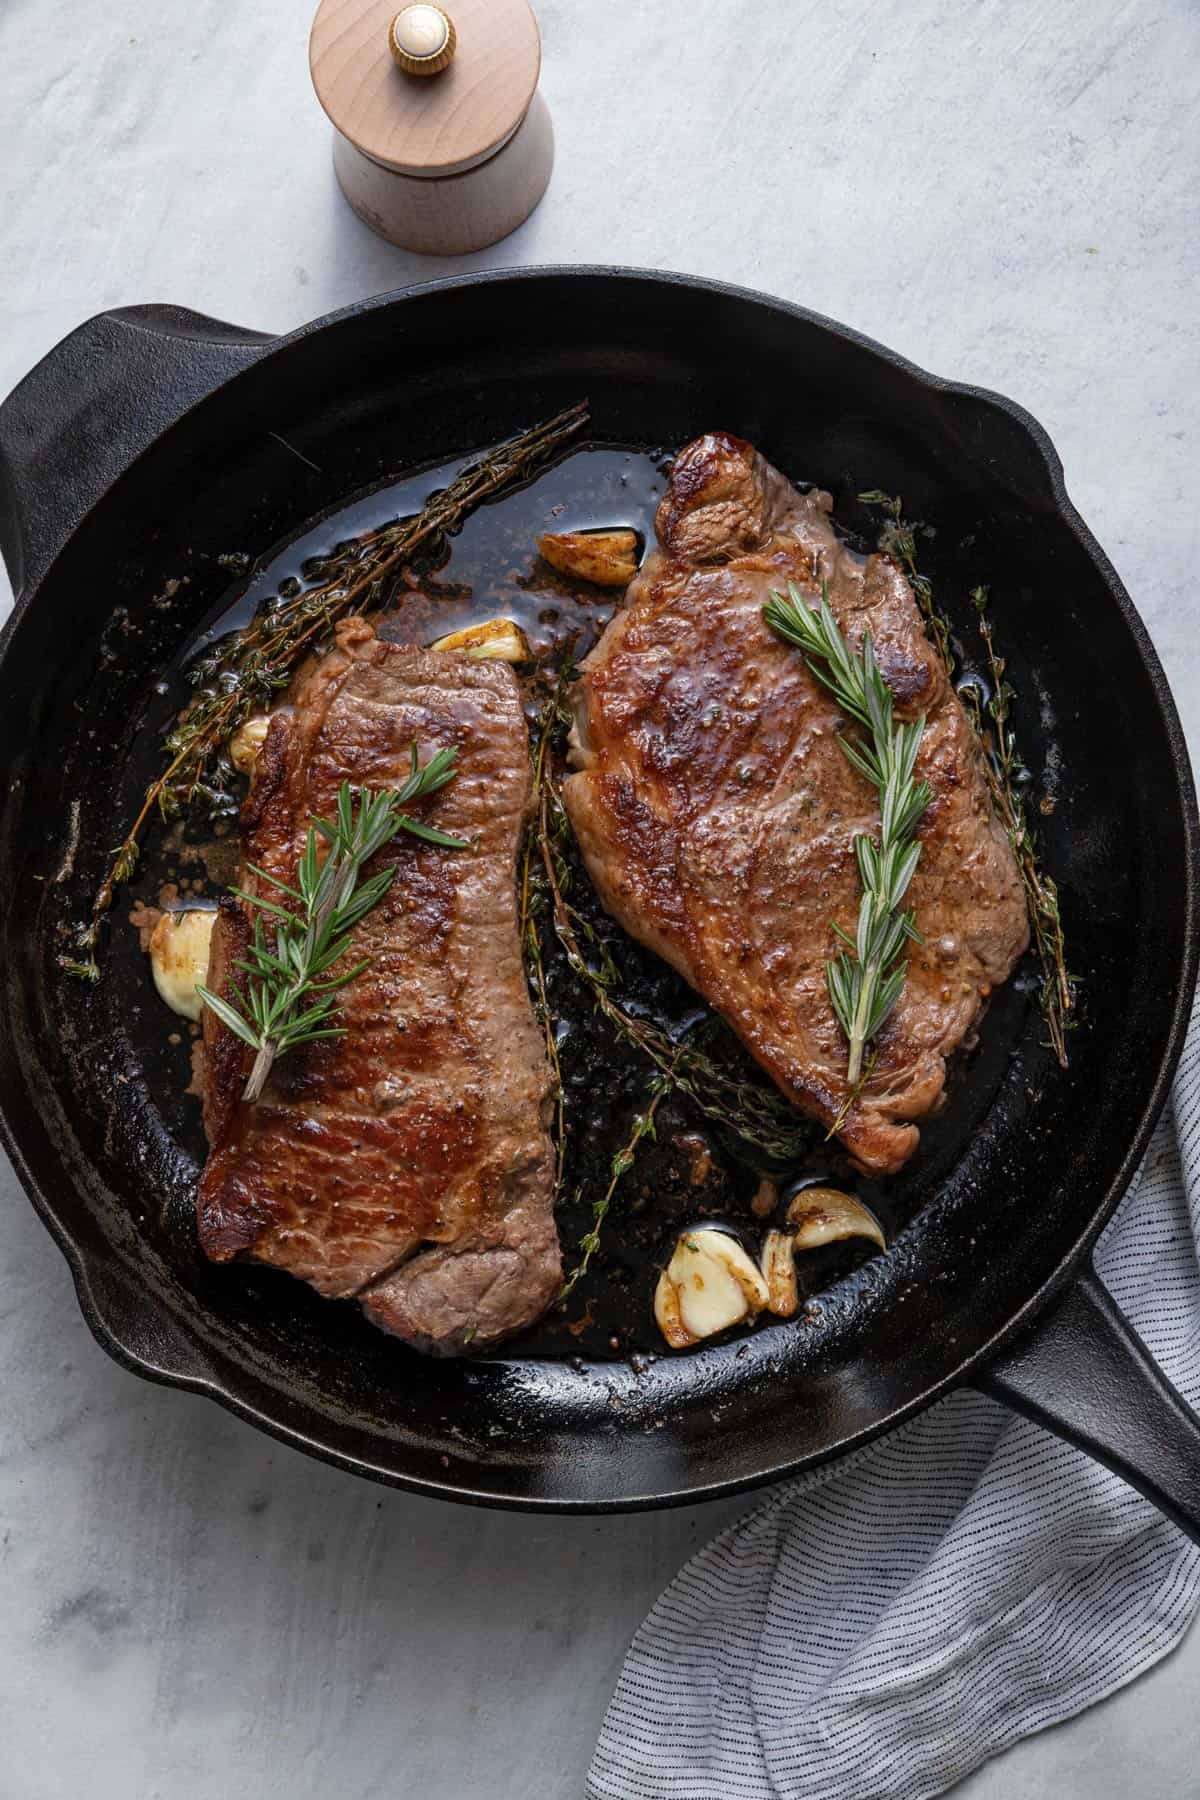 Cooking with Cast Iron: Benefits and Care Tips